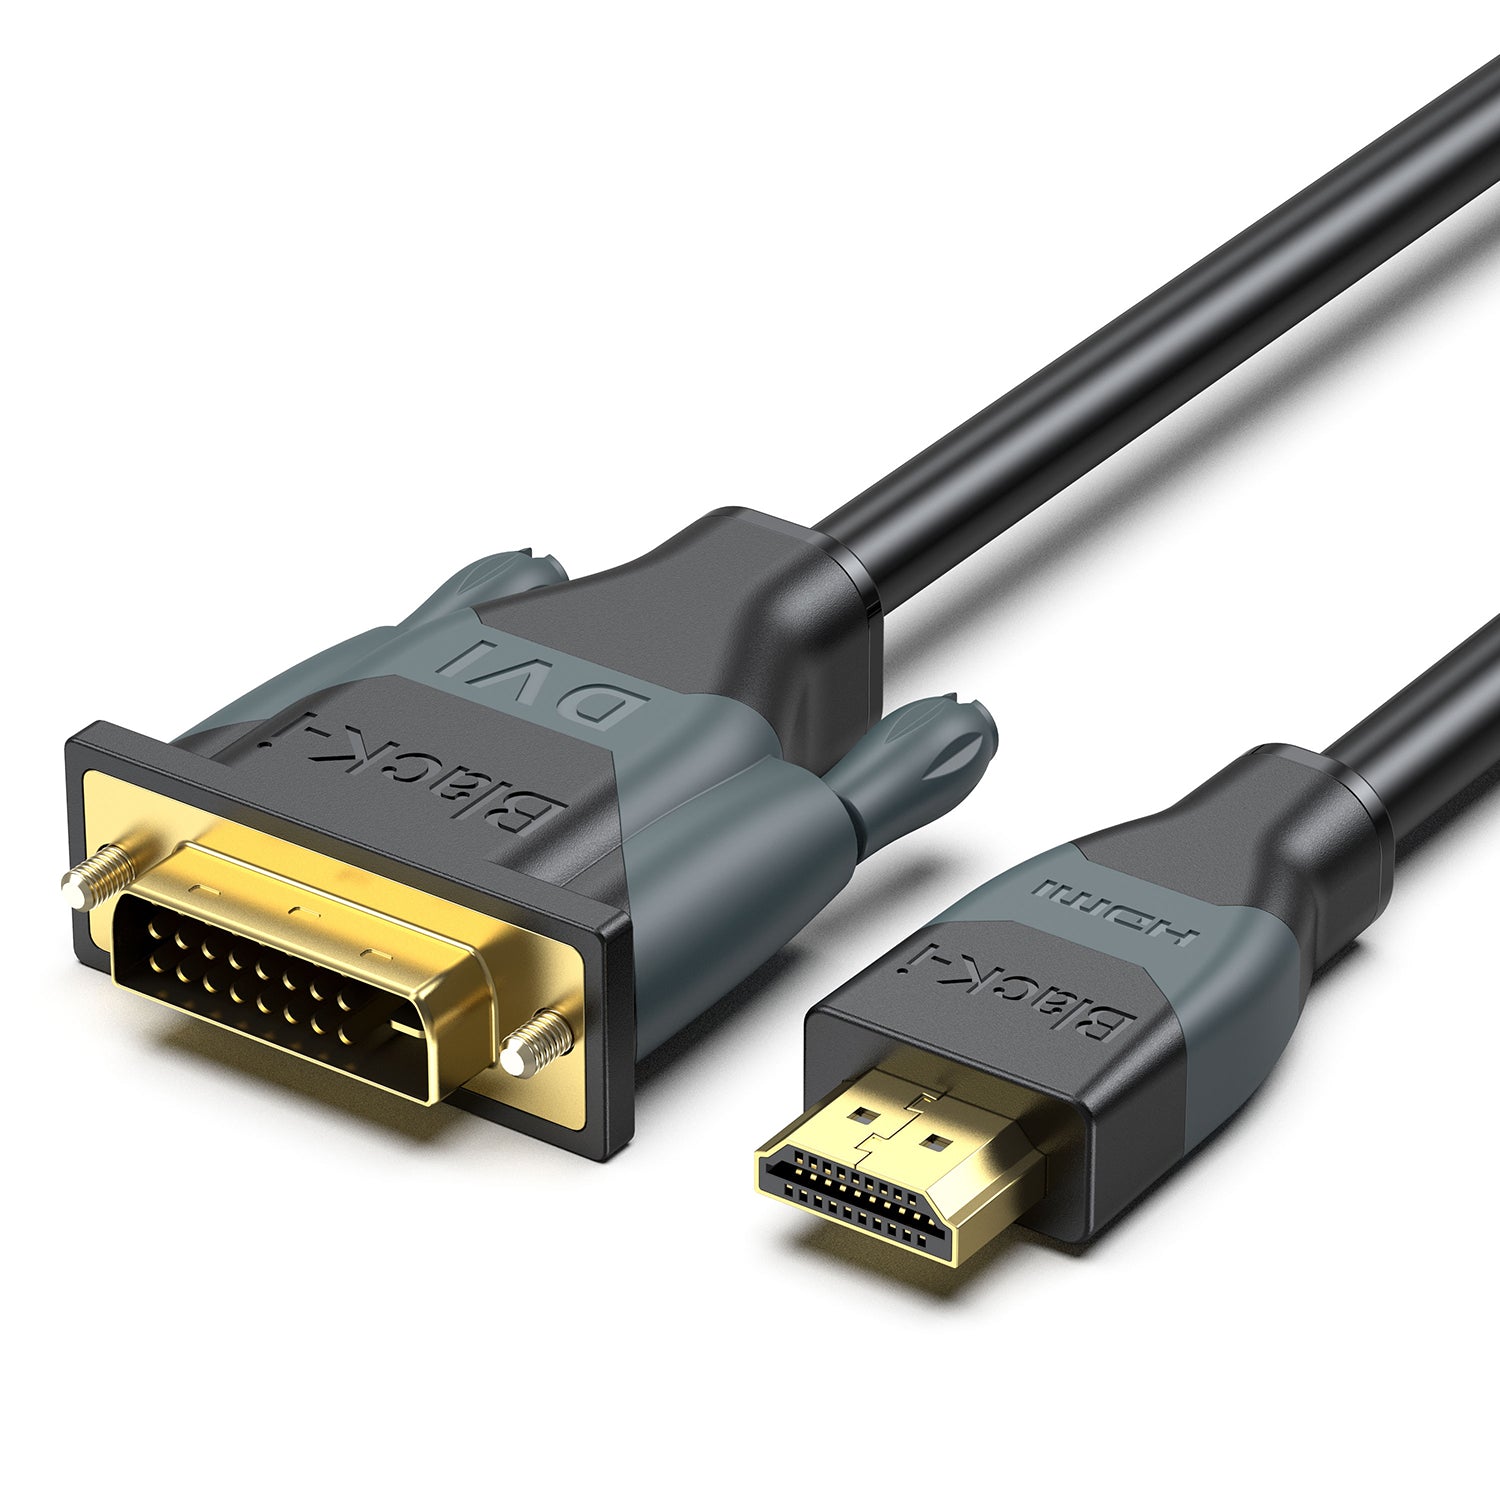 Black-i HDMI to DVI Cable – High-Definition Connectivity for Crisp Visuals and Seamless Multimedia Transmission